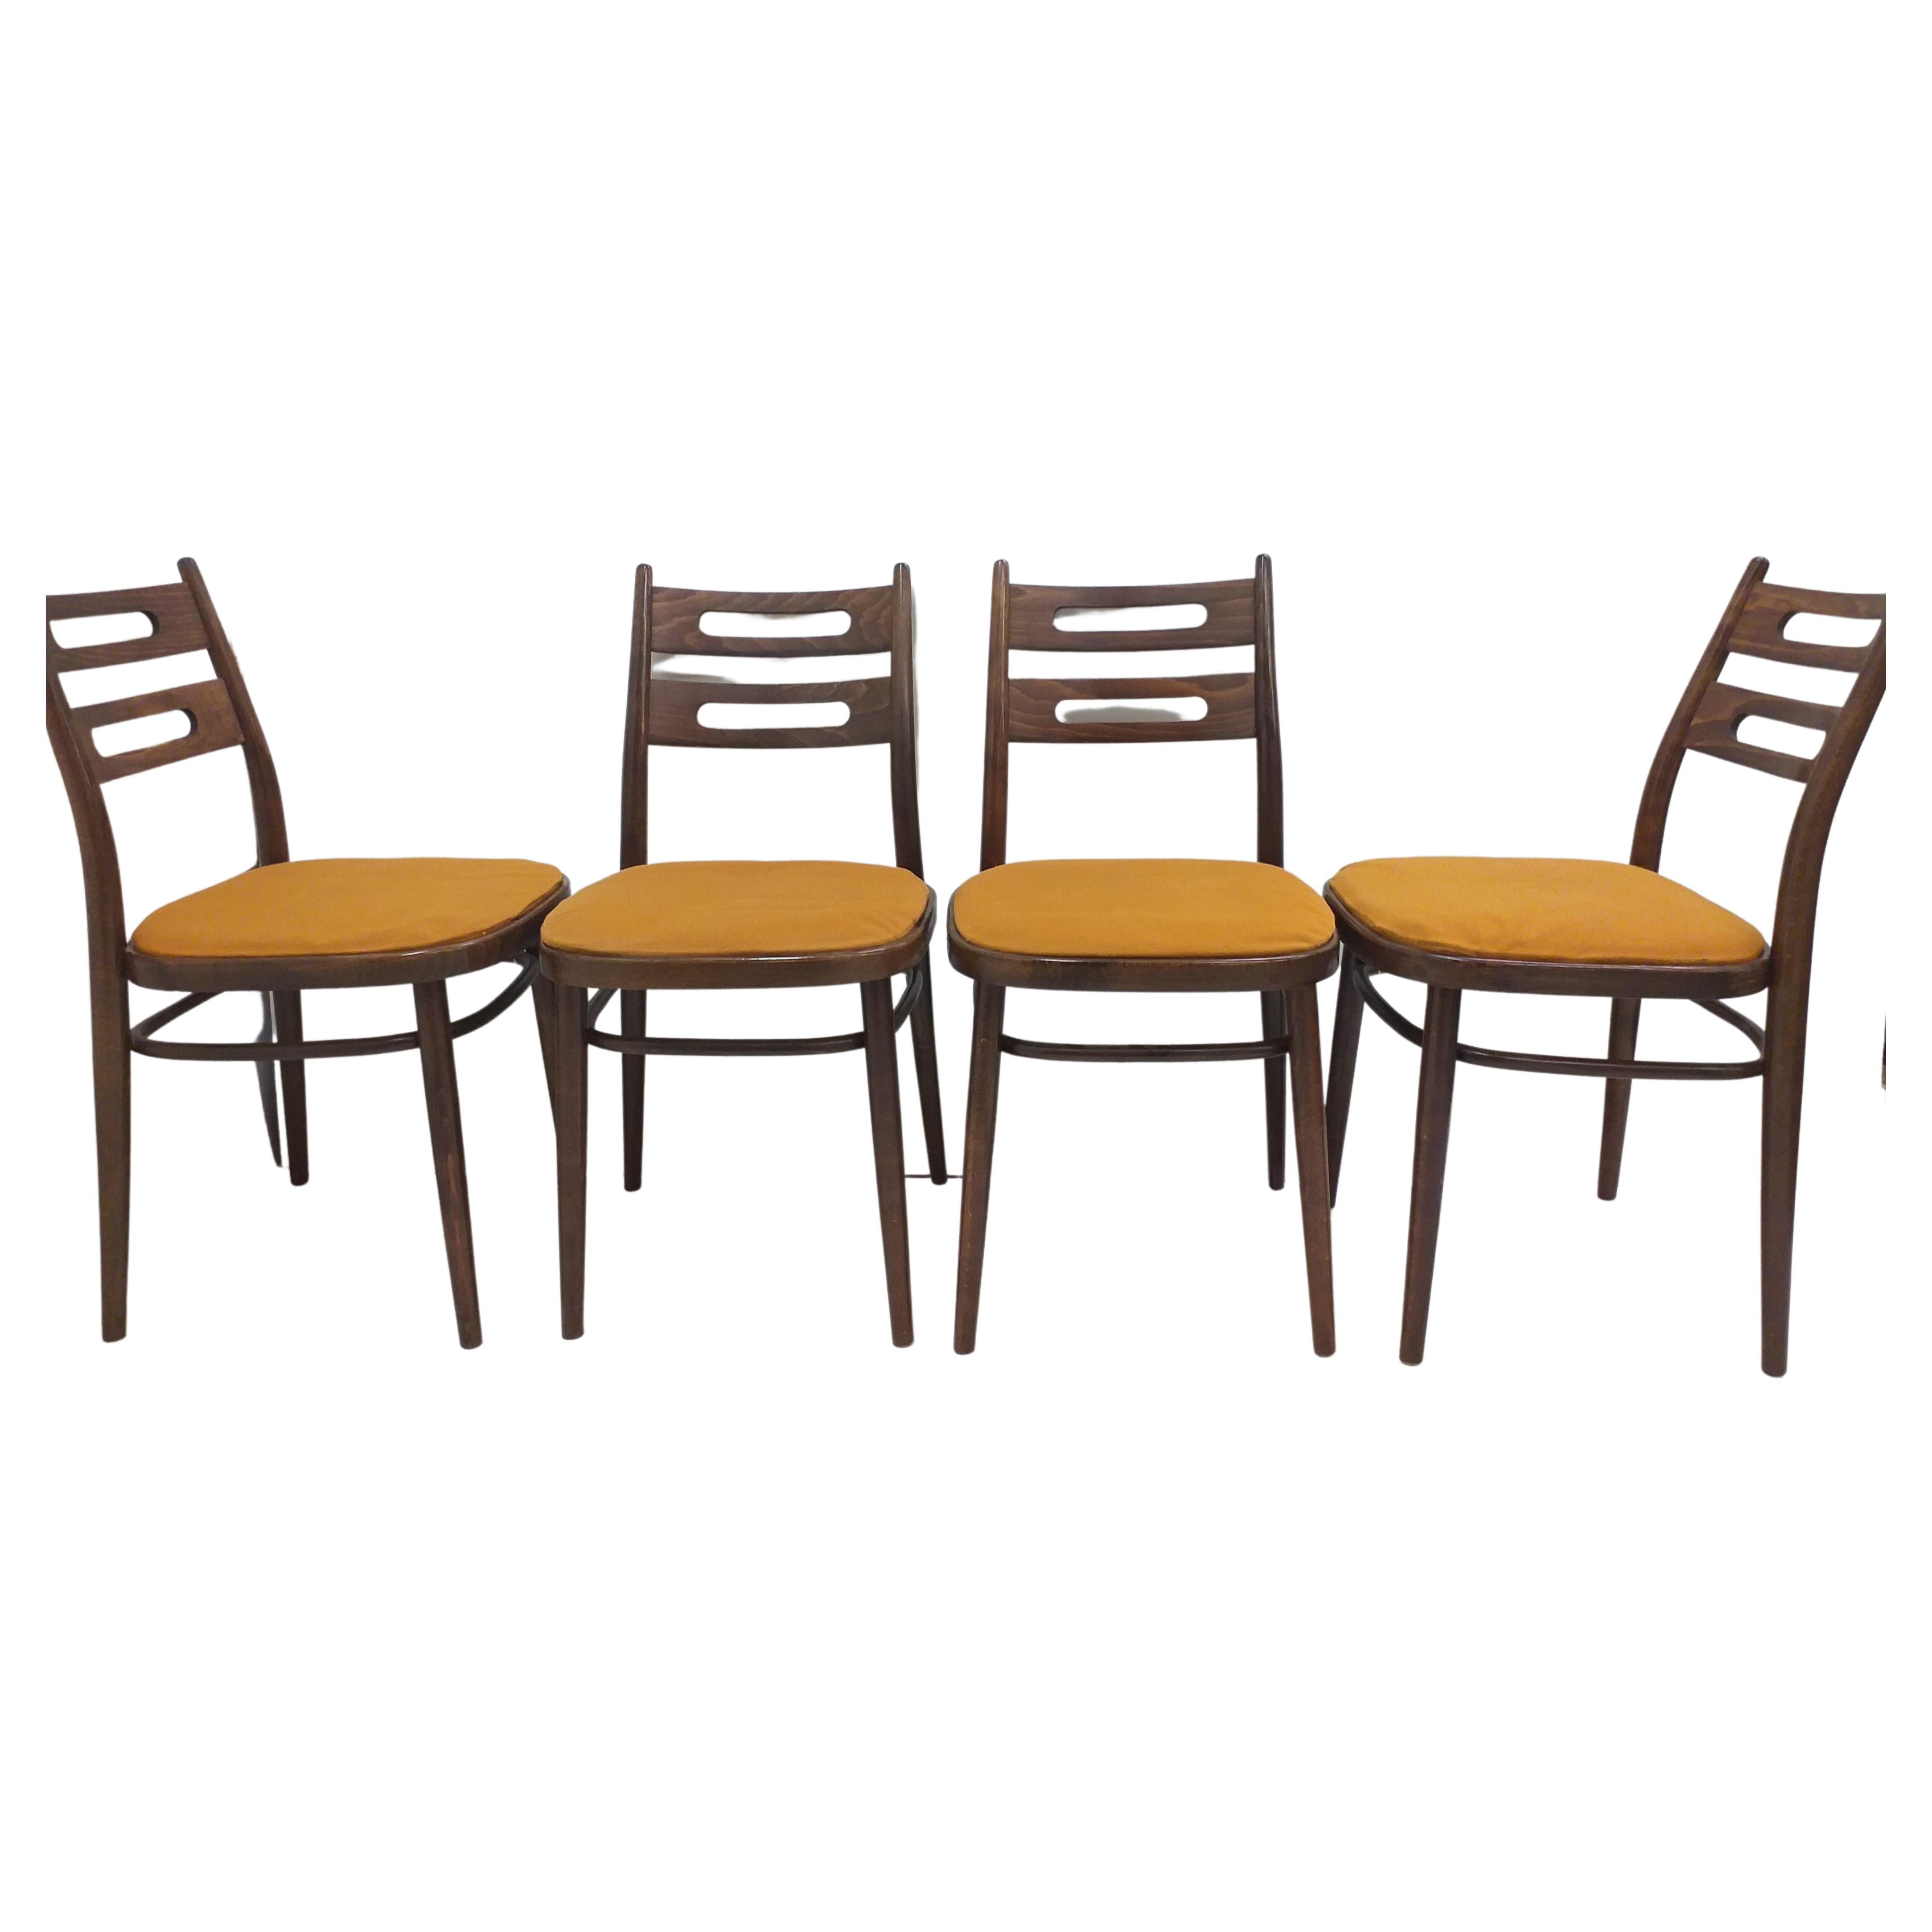 1960 4 Pieces of Ton Chairs, Czechoslovakia For Sale